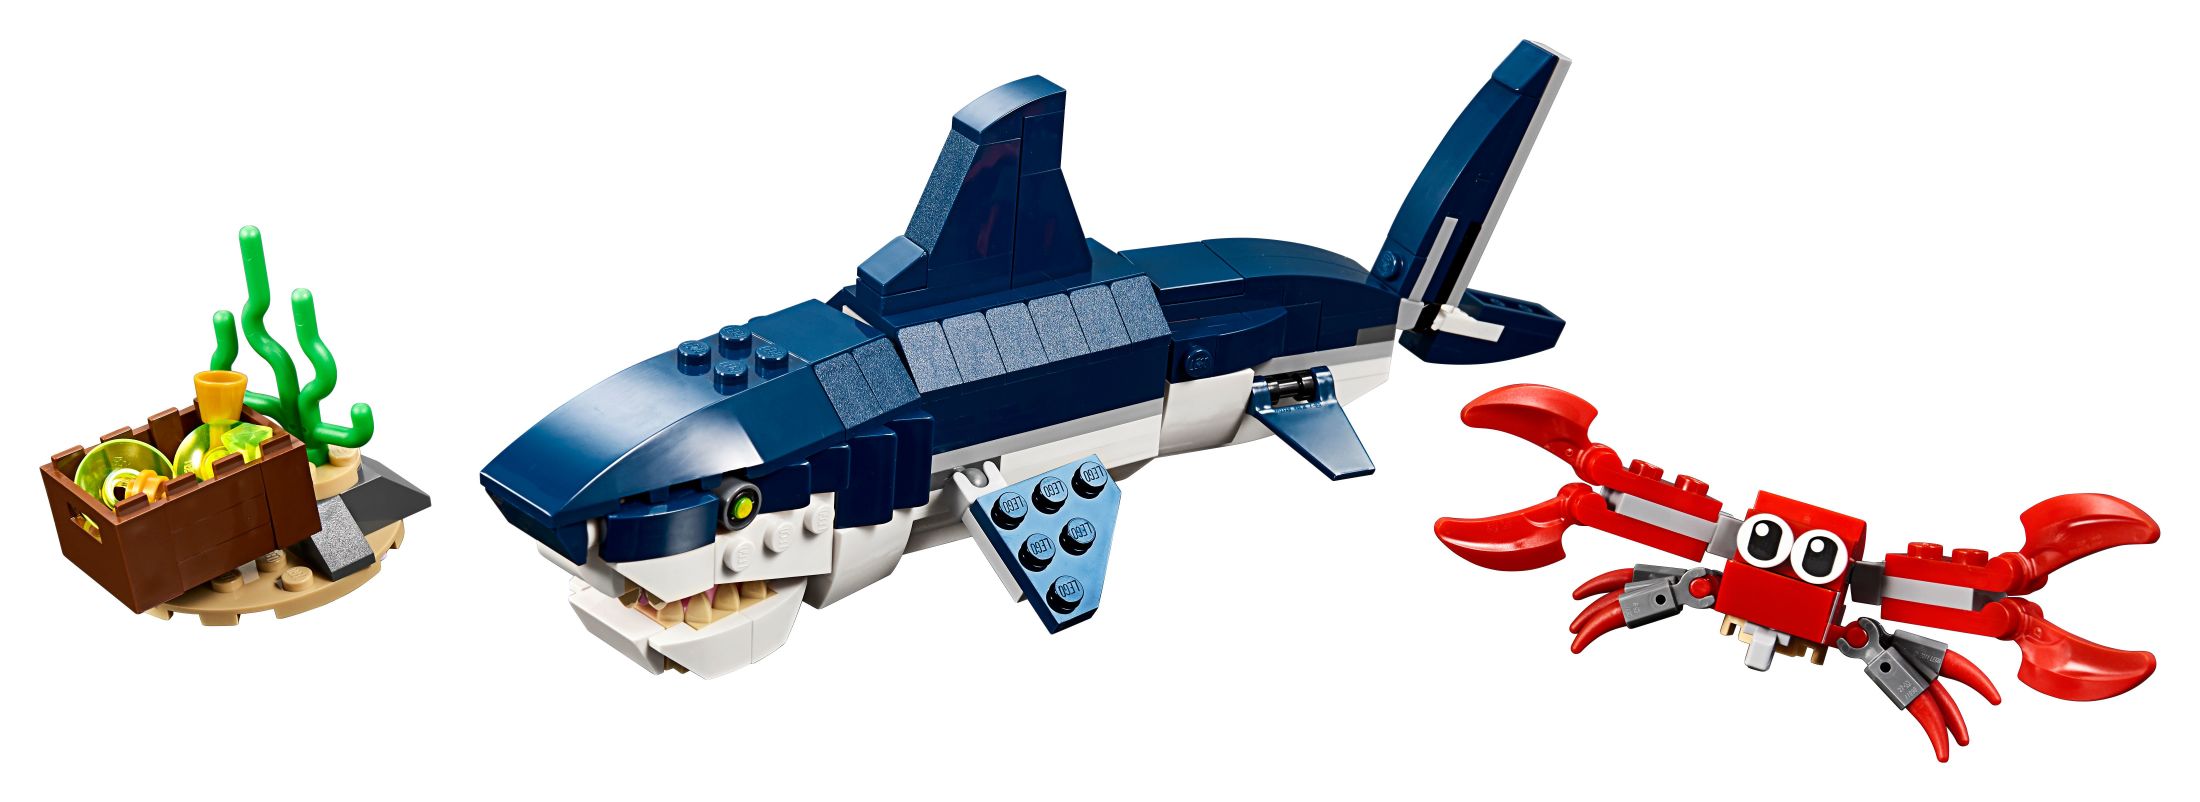 LEGO Creator 3 in 1 Deep Sea Creatures, Transforms from Shark and Crab to Squid to Angler Fish, Sea Animal Toys, Gifts for 7 Plus Year Old Girls and Boys, 31088 - image 4 of 6